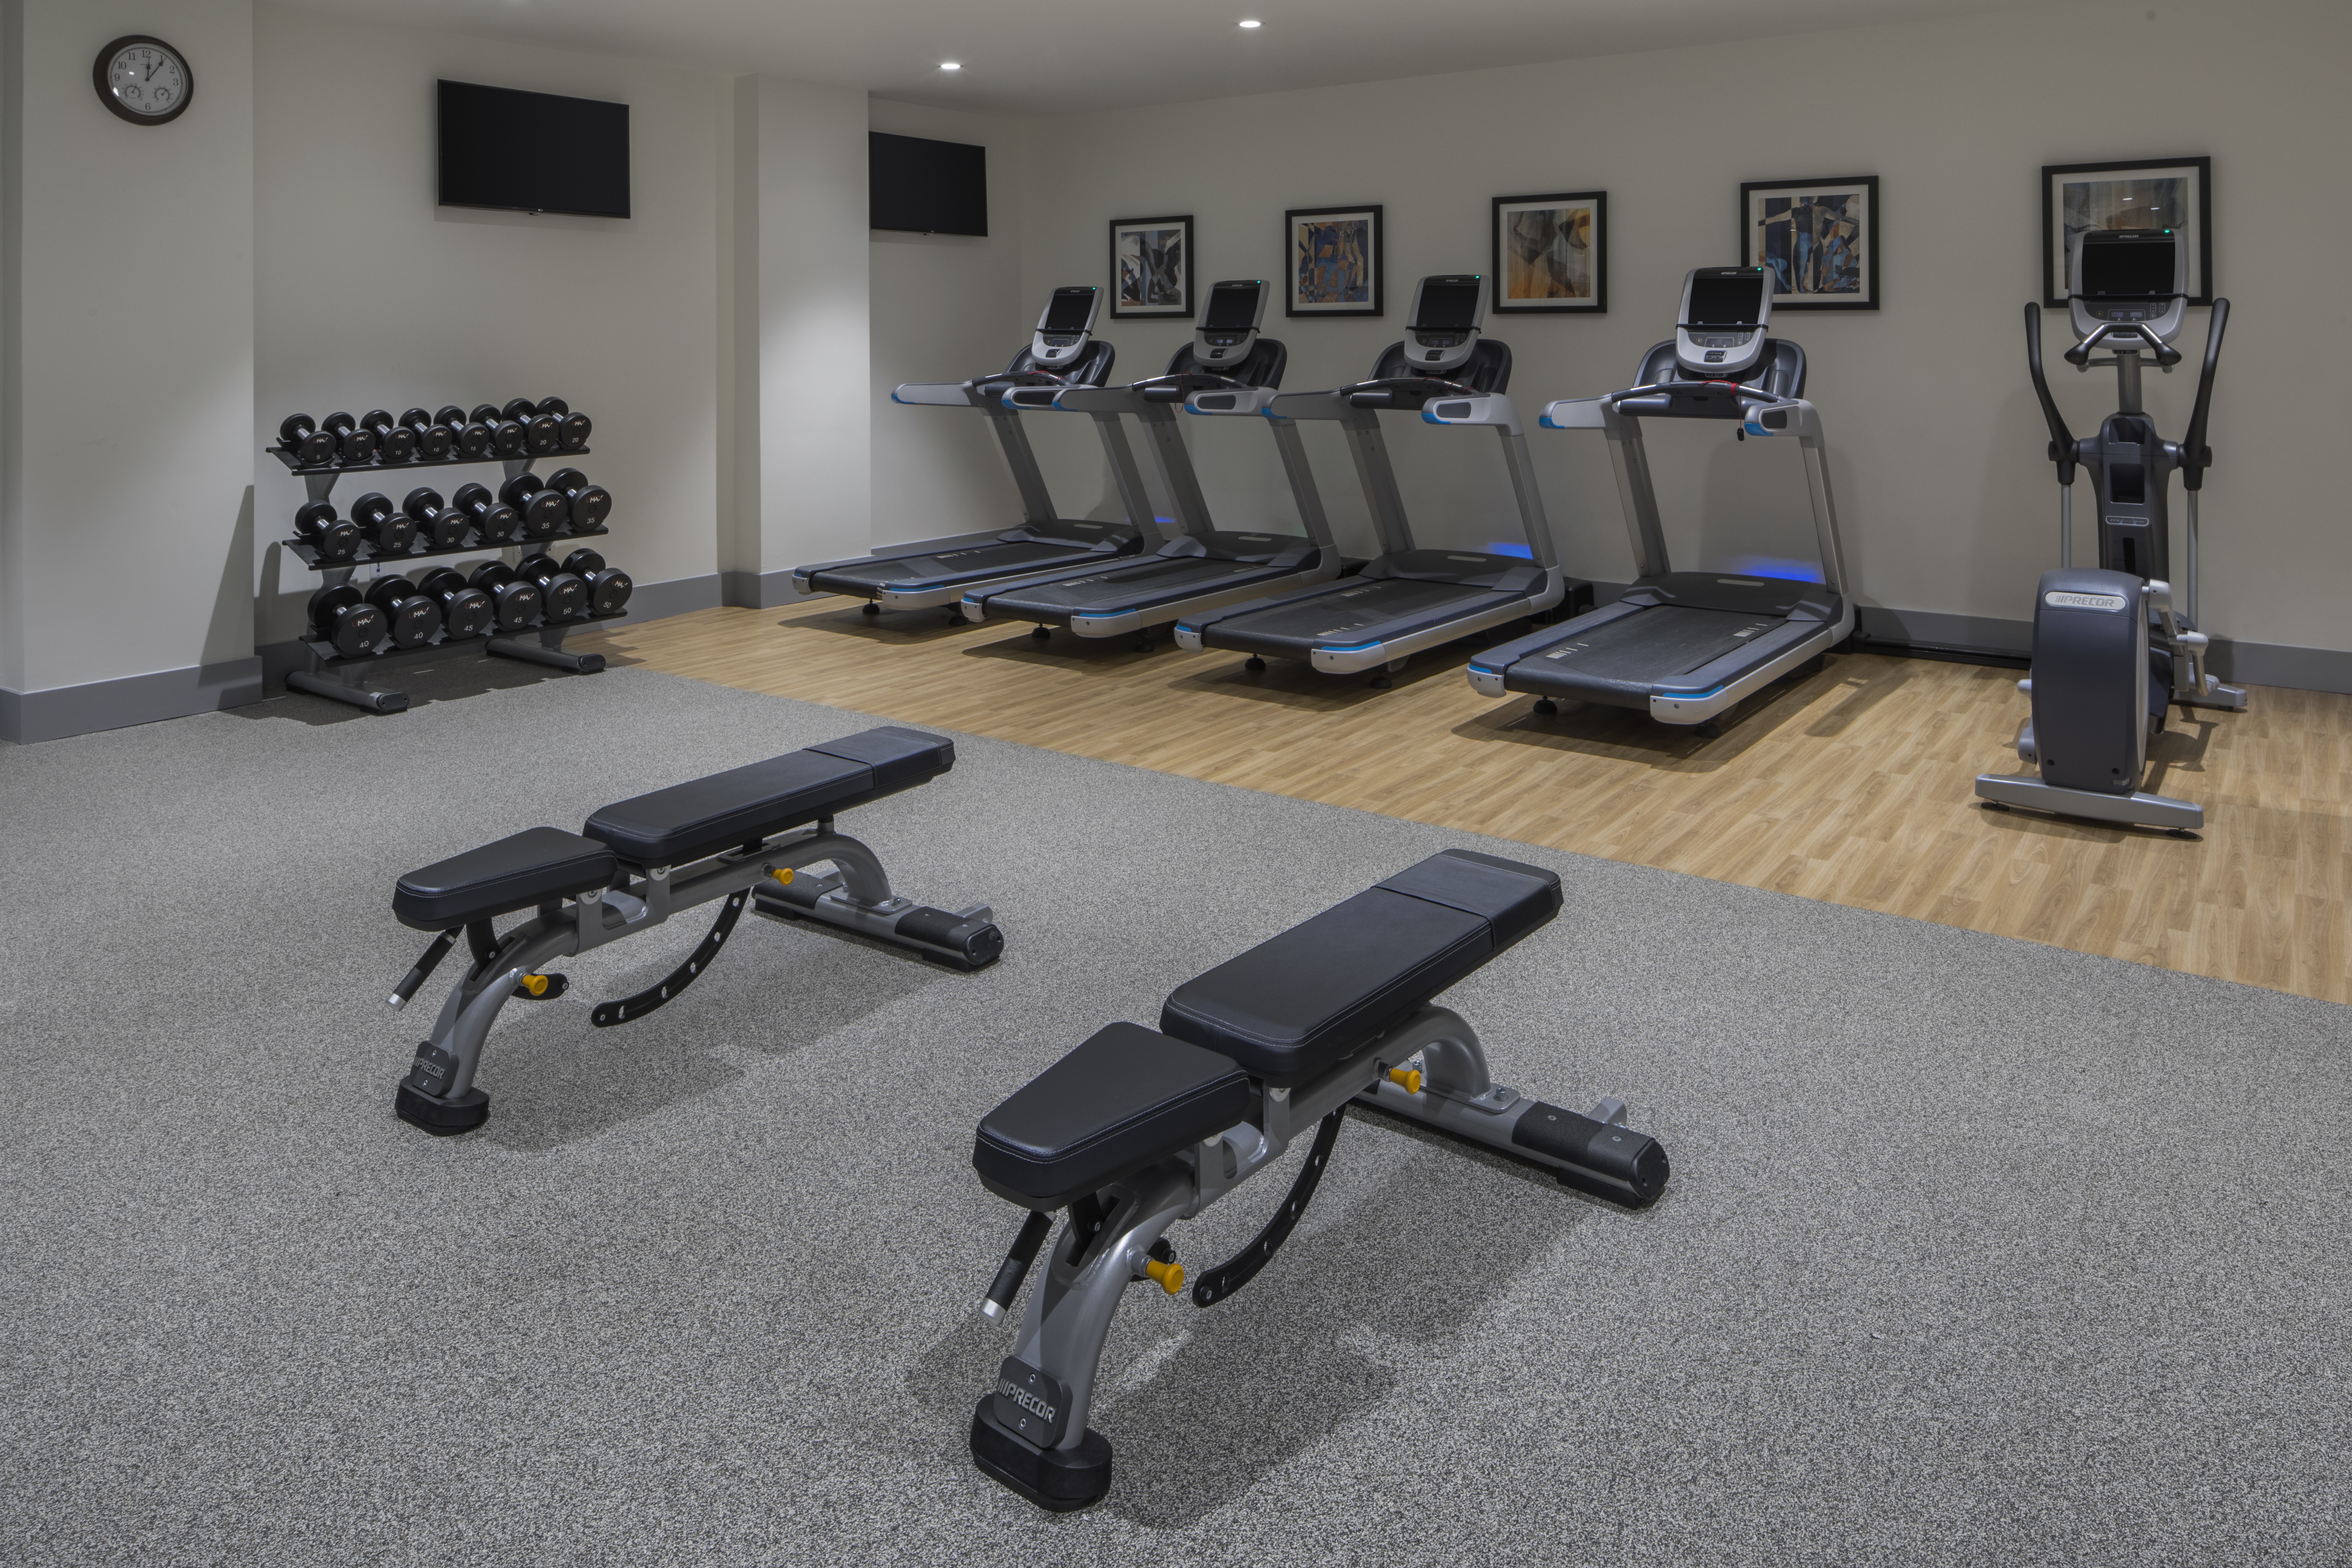 Fitness Center With Weight Benches, Wall Clock, Free Weights, TVs, Cardio Equipment, and Wall Art